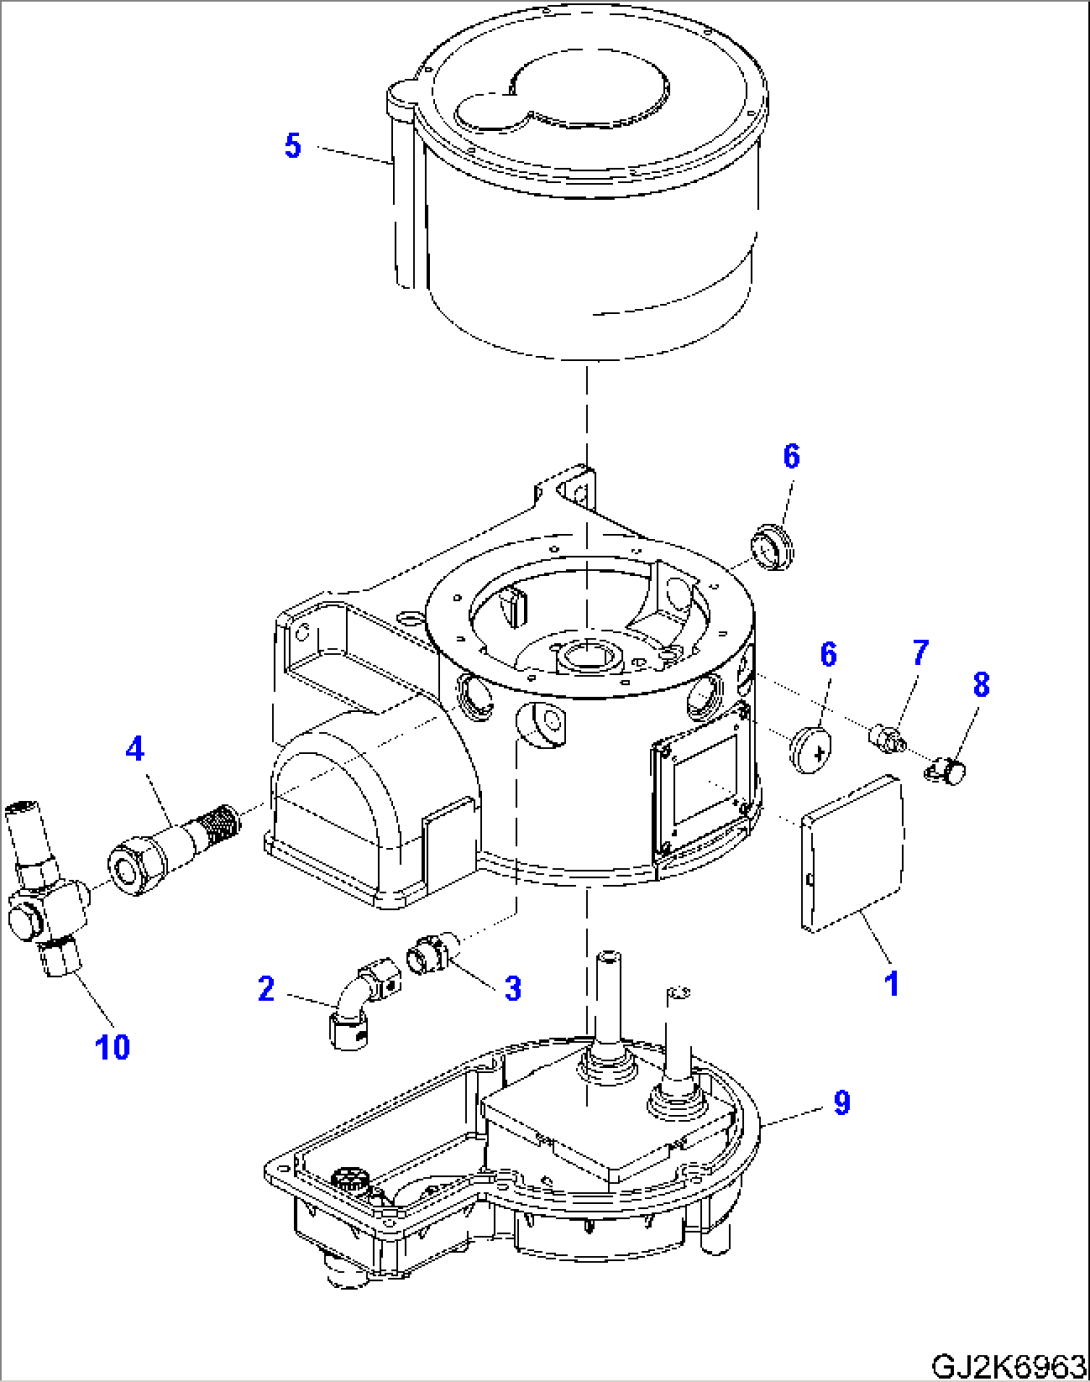 AUTO GREASE - PUMP (INNER PARTS)